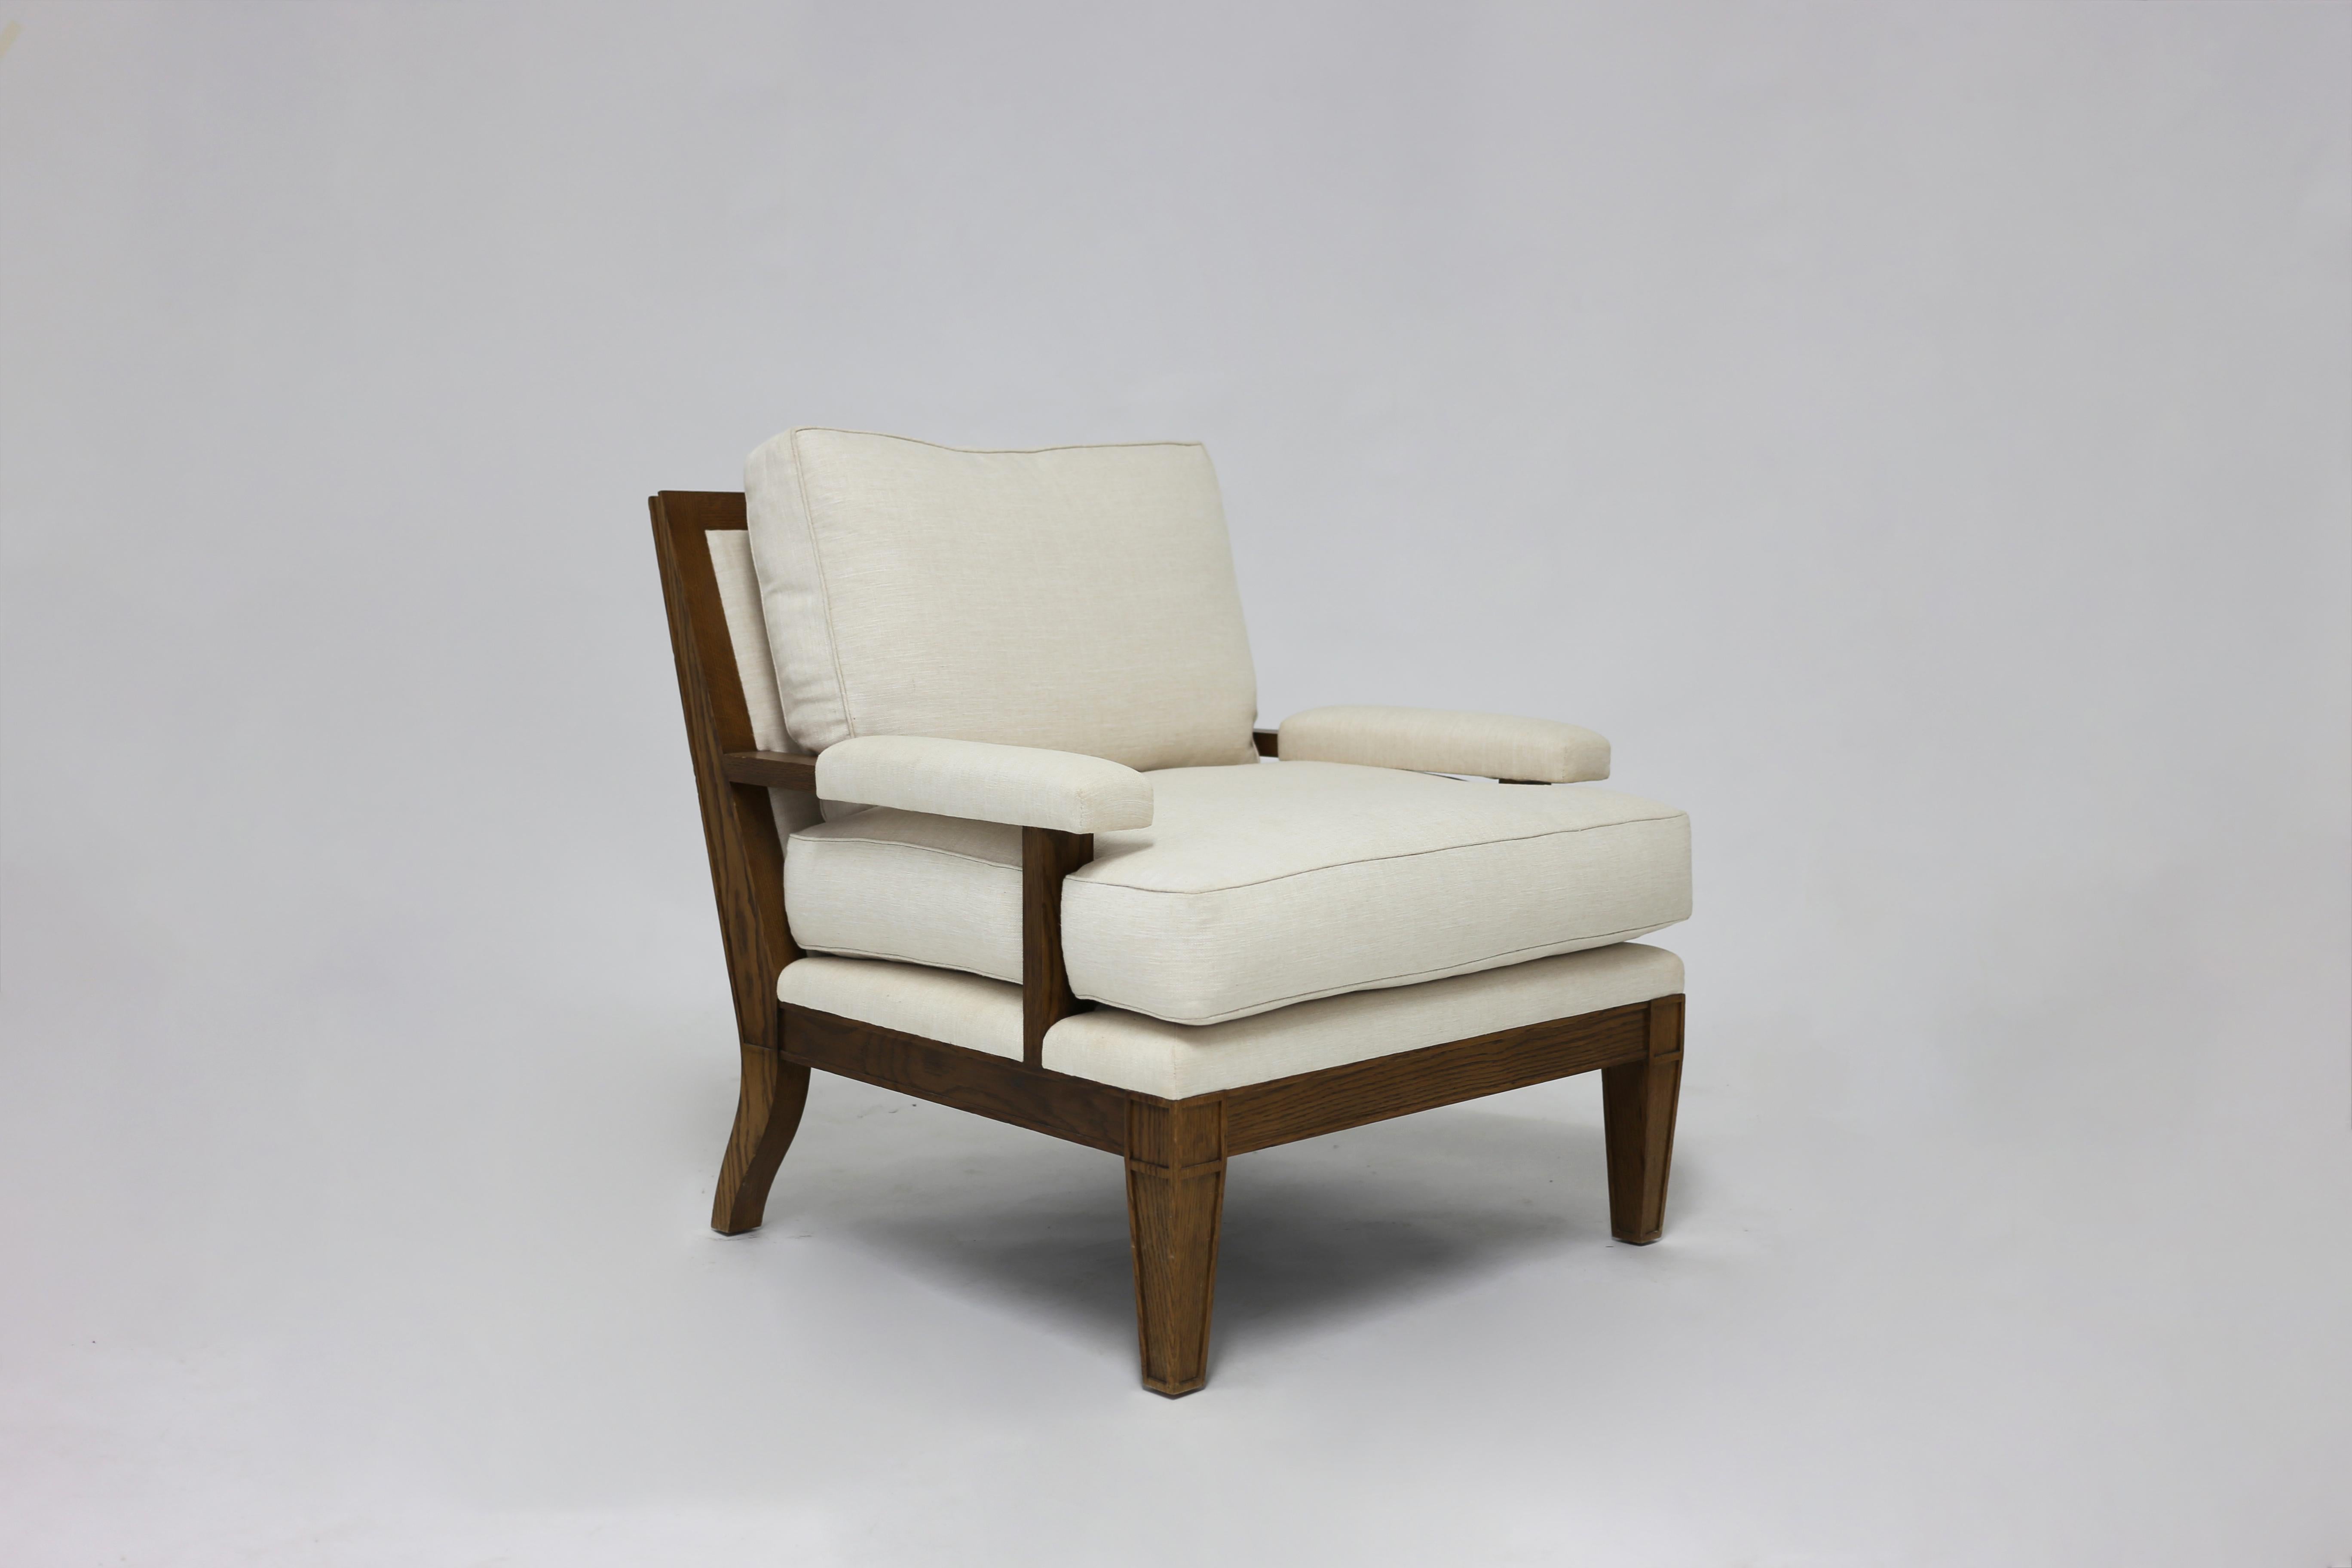 wood frame chair with cushions